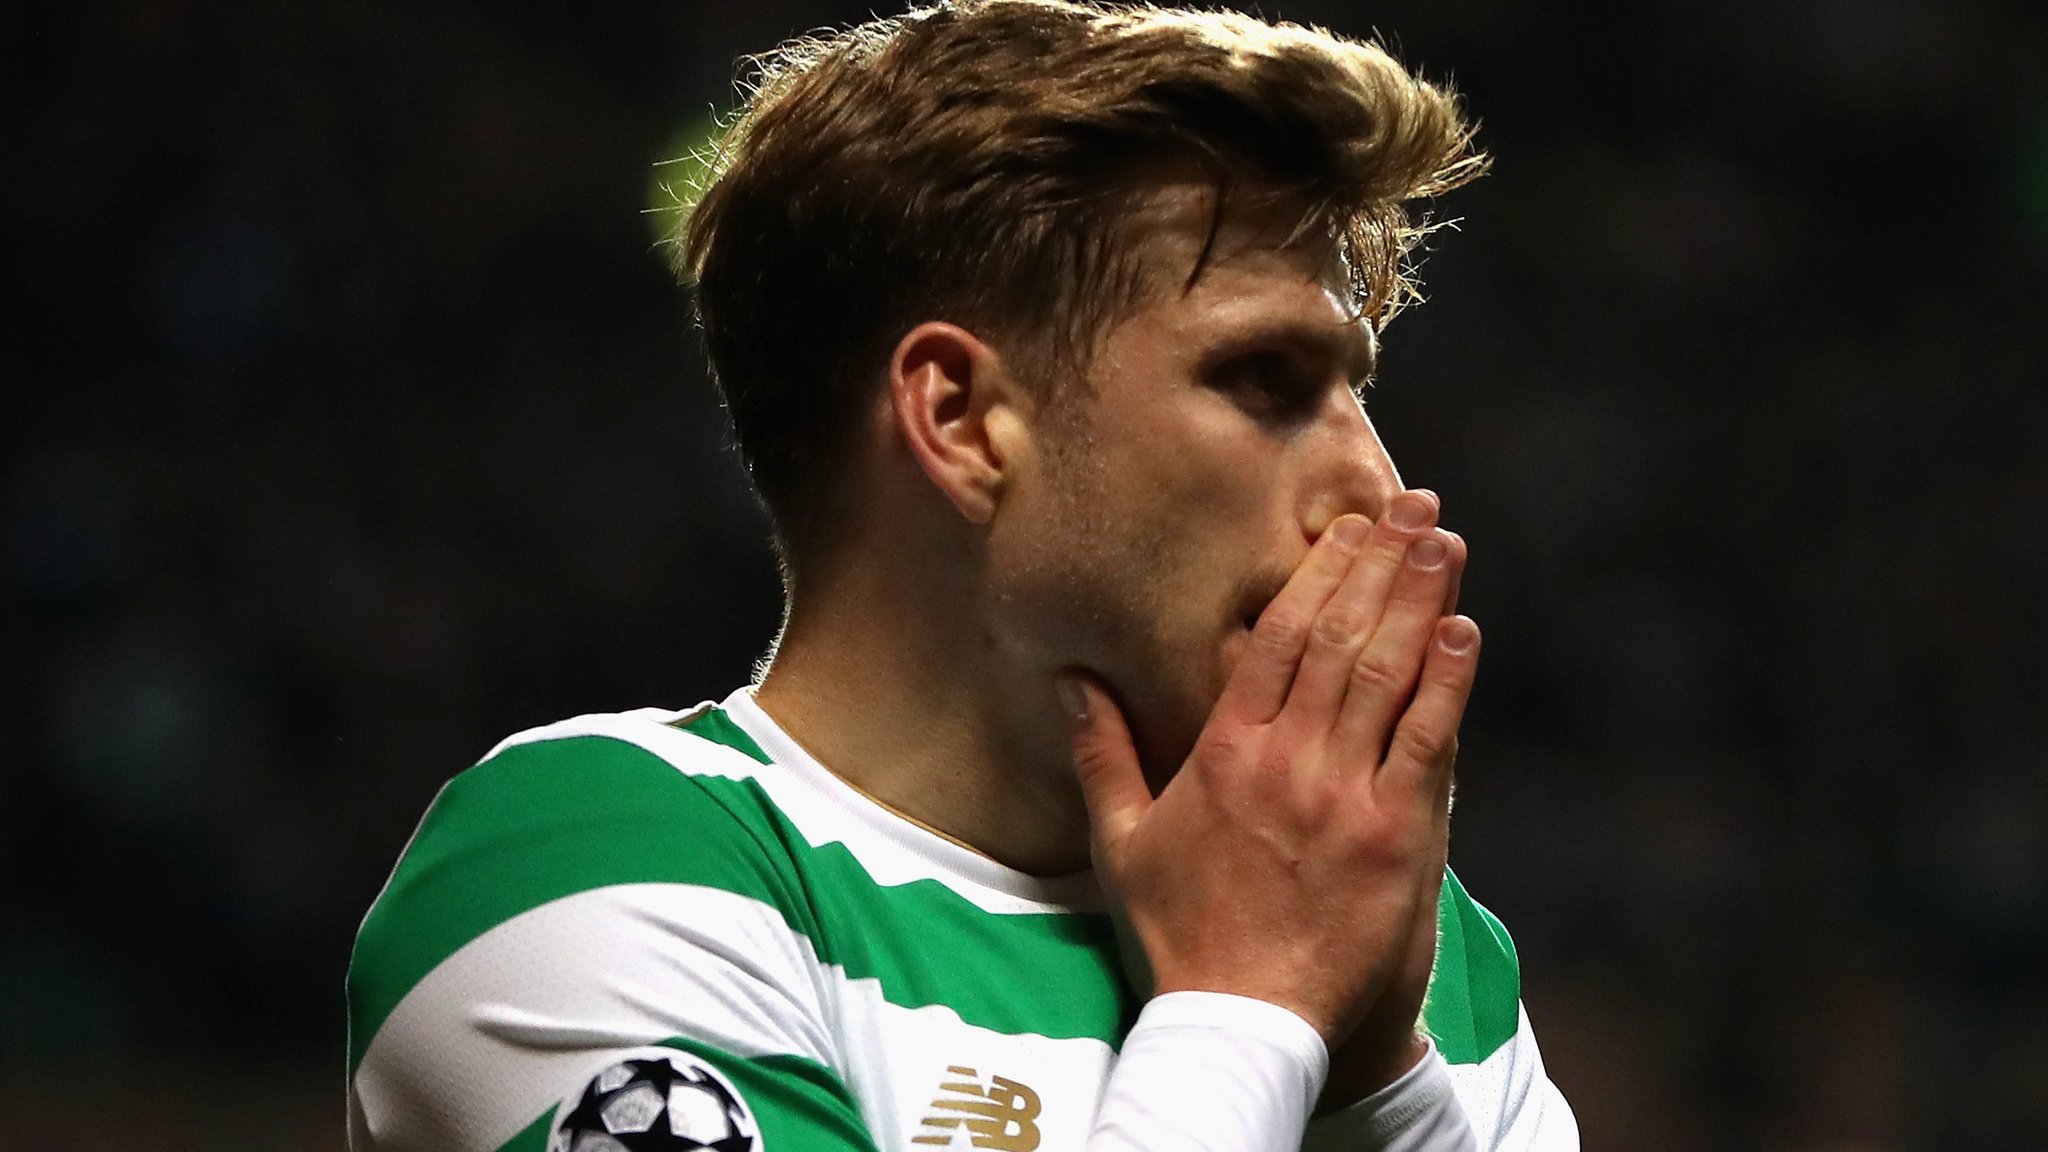 Celtic out of Champions League after Martinez heads winner